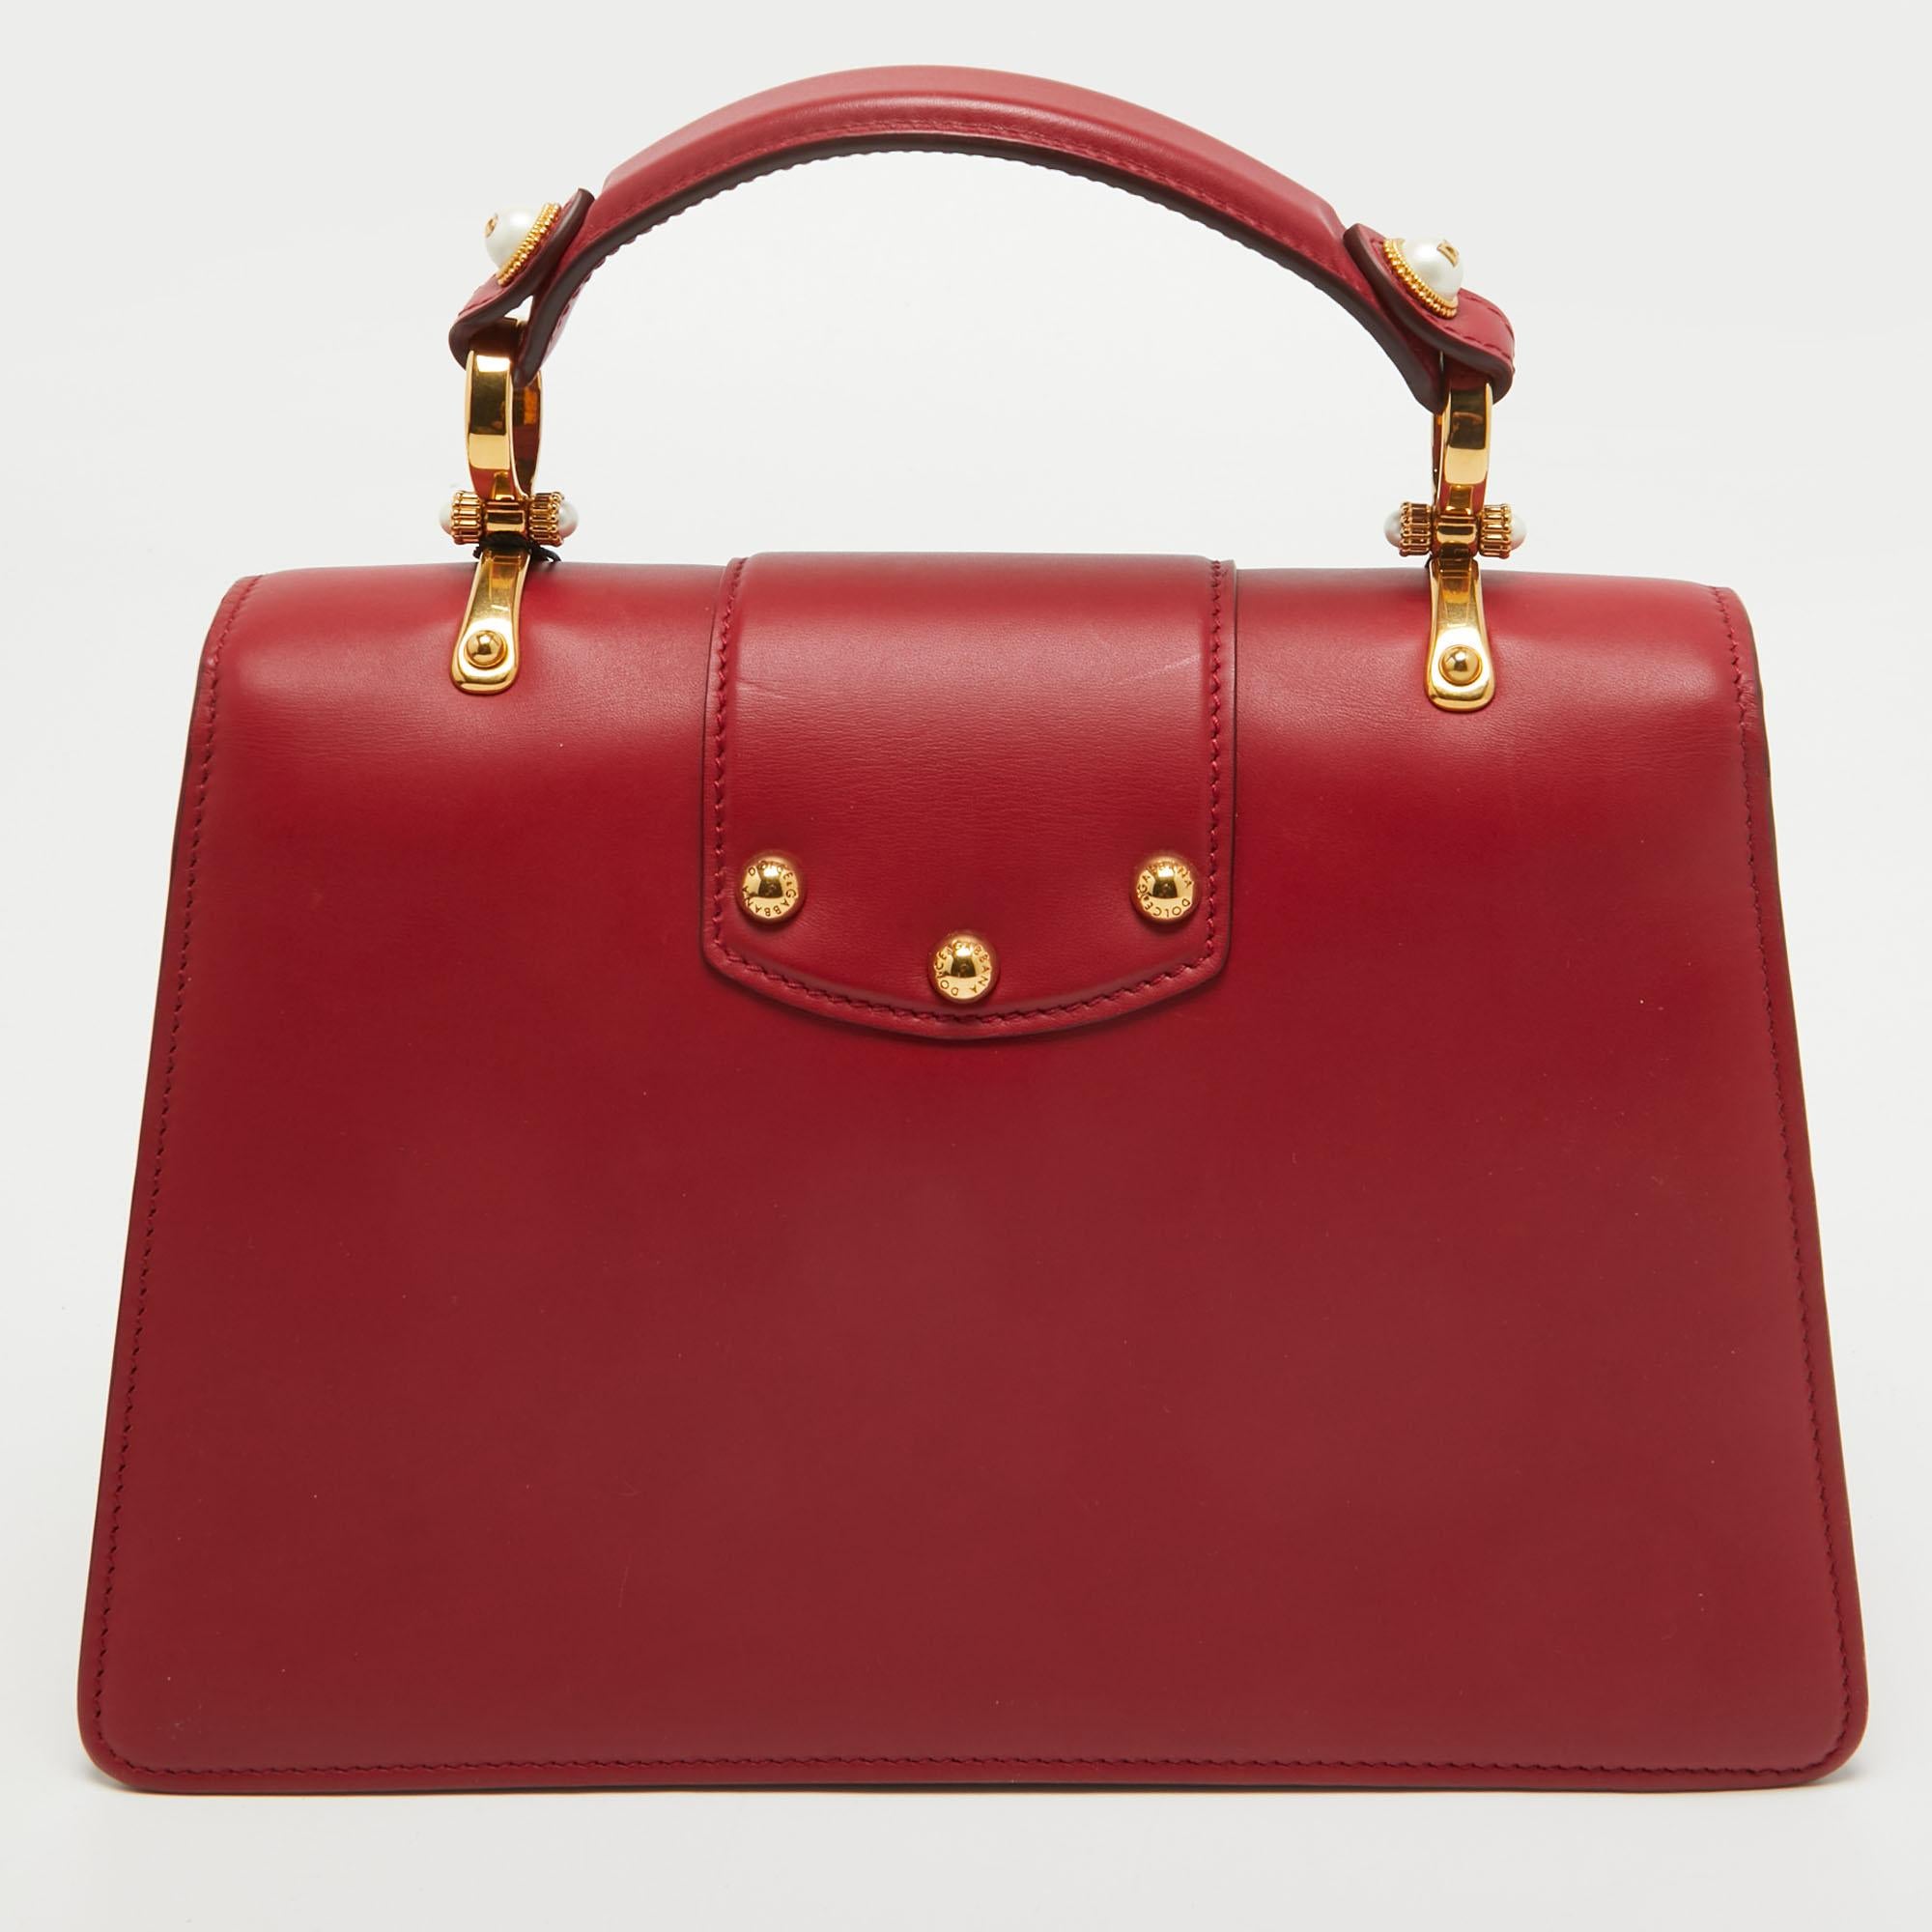 Well-structured and high on style, this DG Amore bag from Dolce & Gabbana deserves to be yours! It has been crafted from red leather and styled with a top handle and a detachable shoulder strap. It also comes with gold-tone embellished logo detail